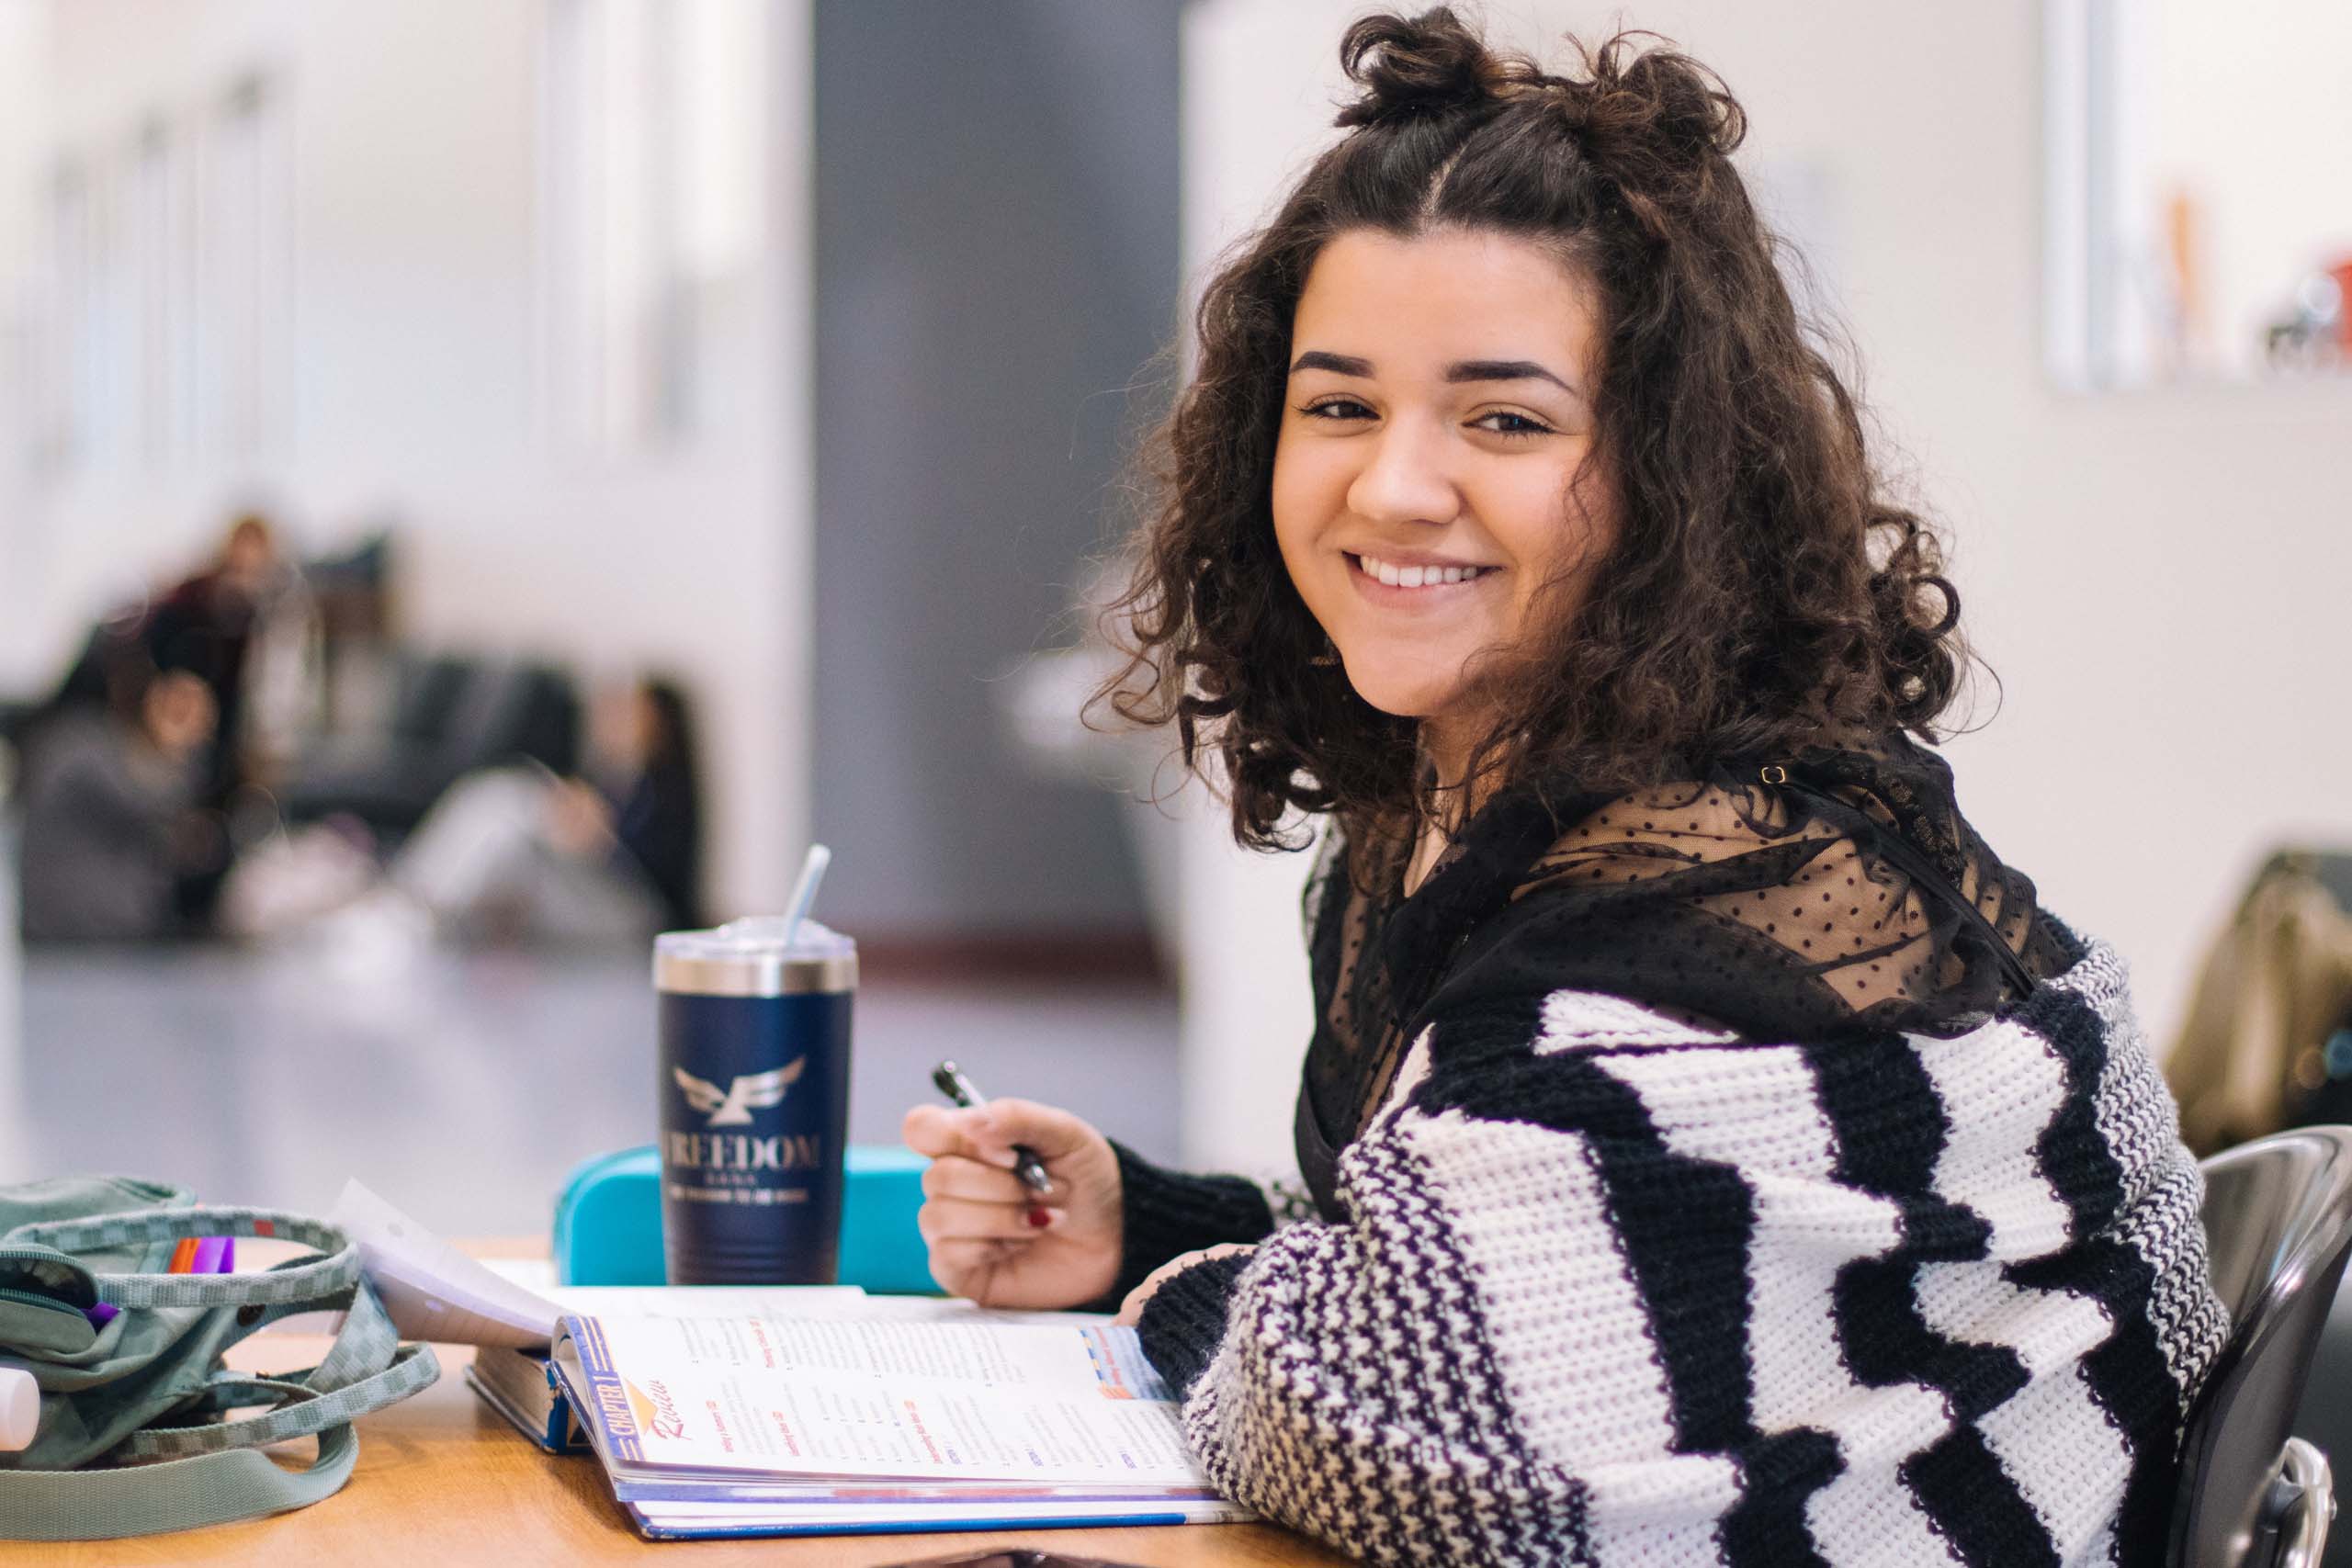 Young woman with dark curly hair and a smile looks to camera while studying